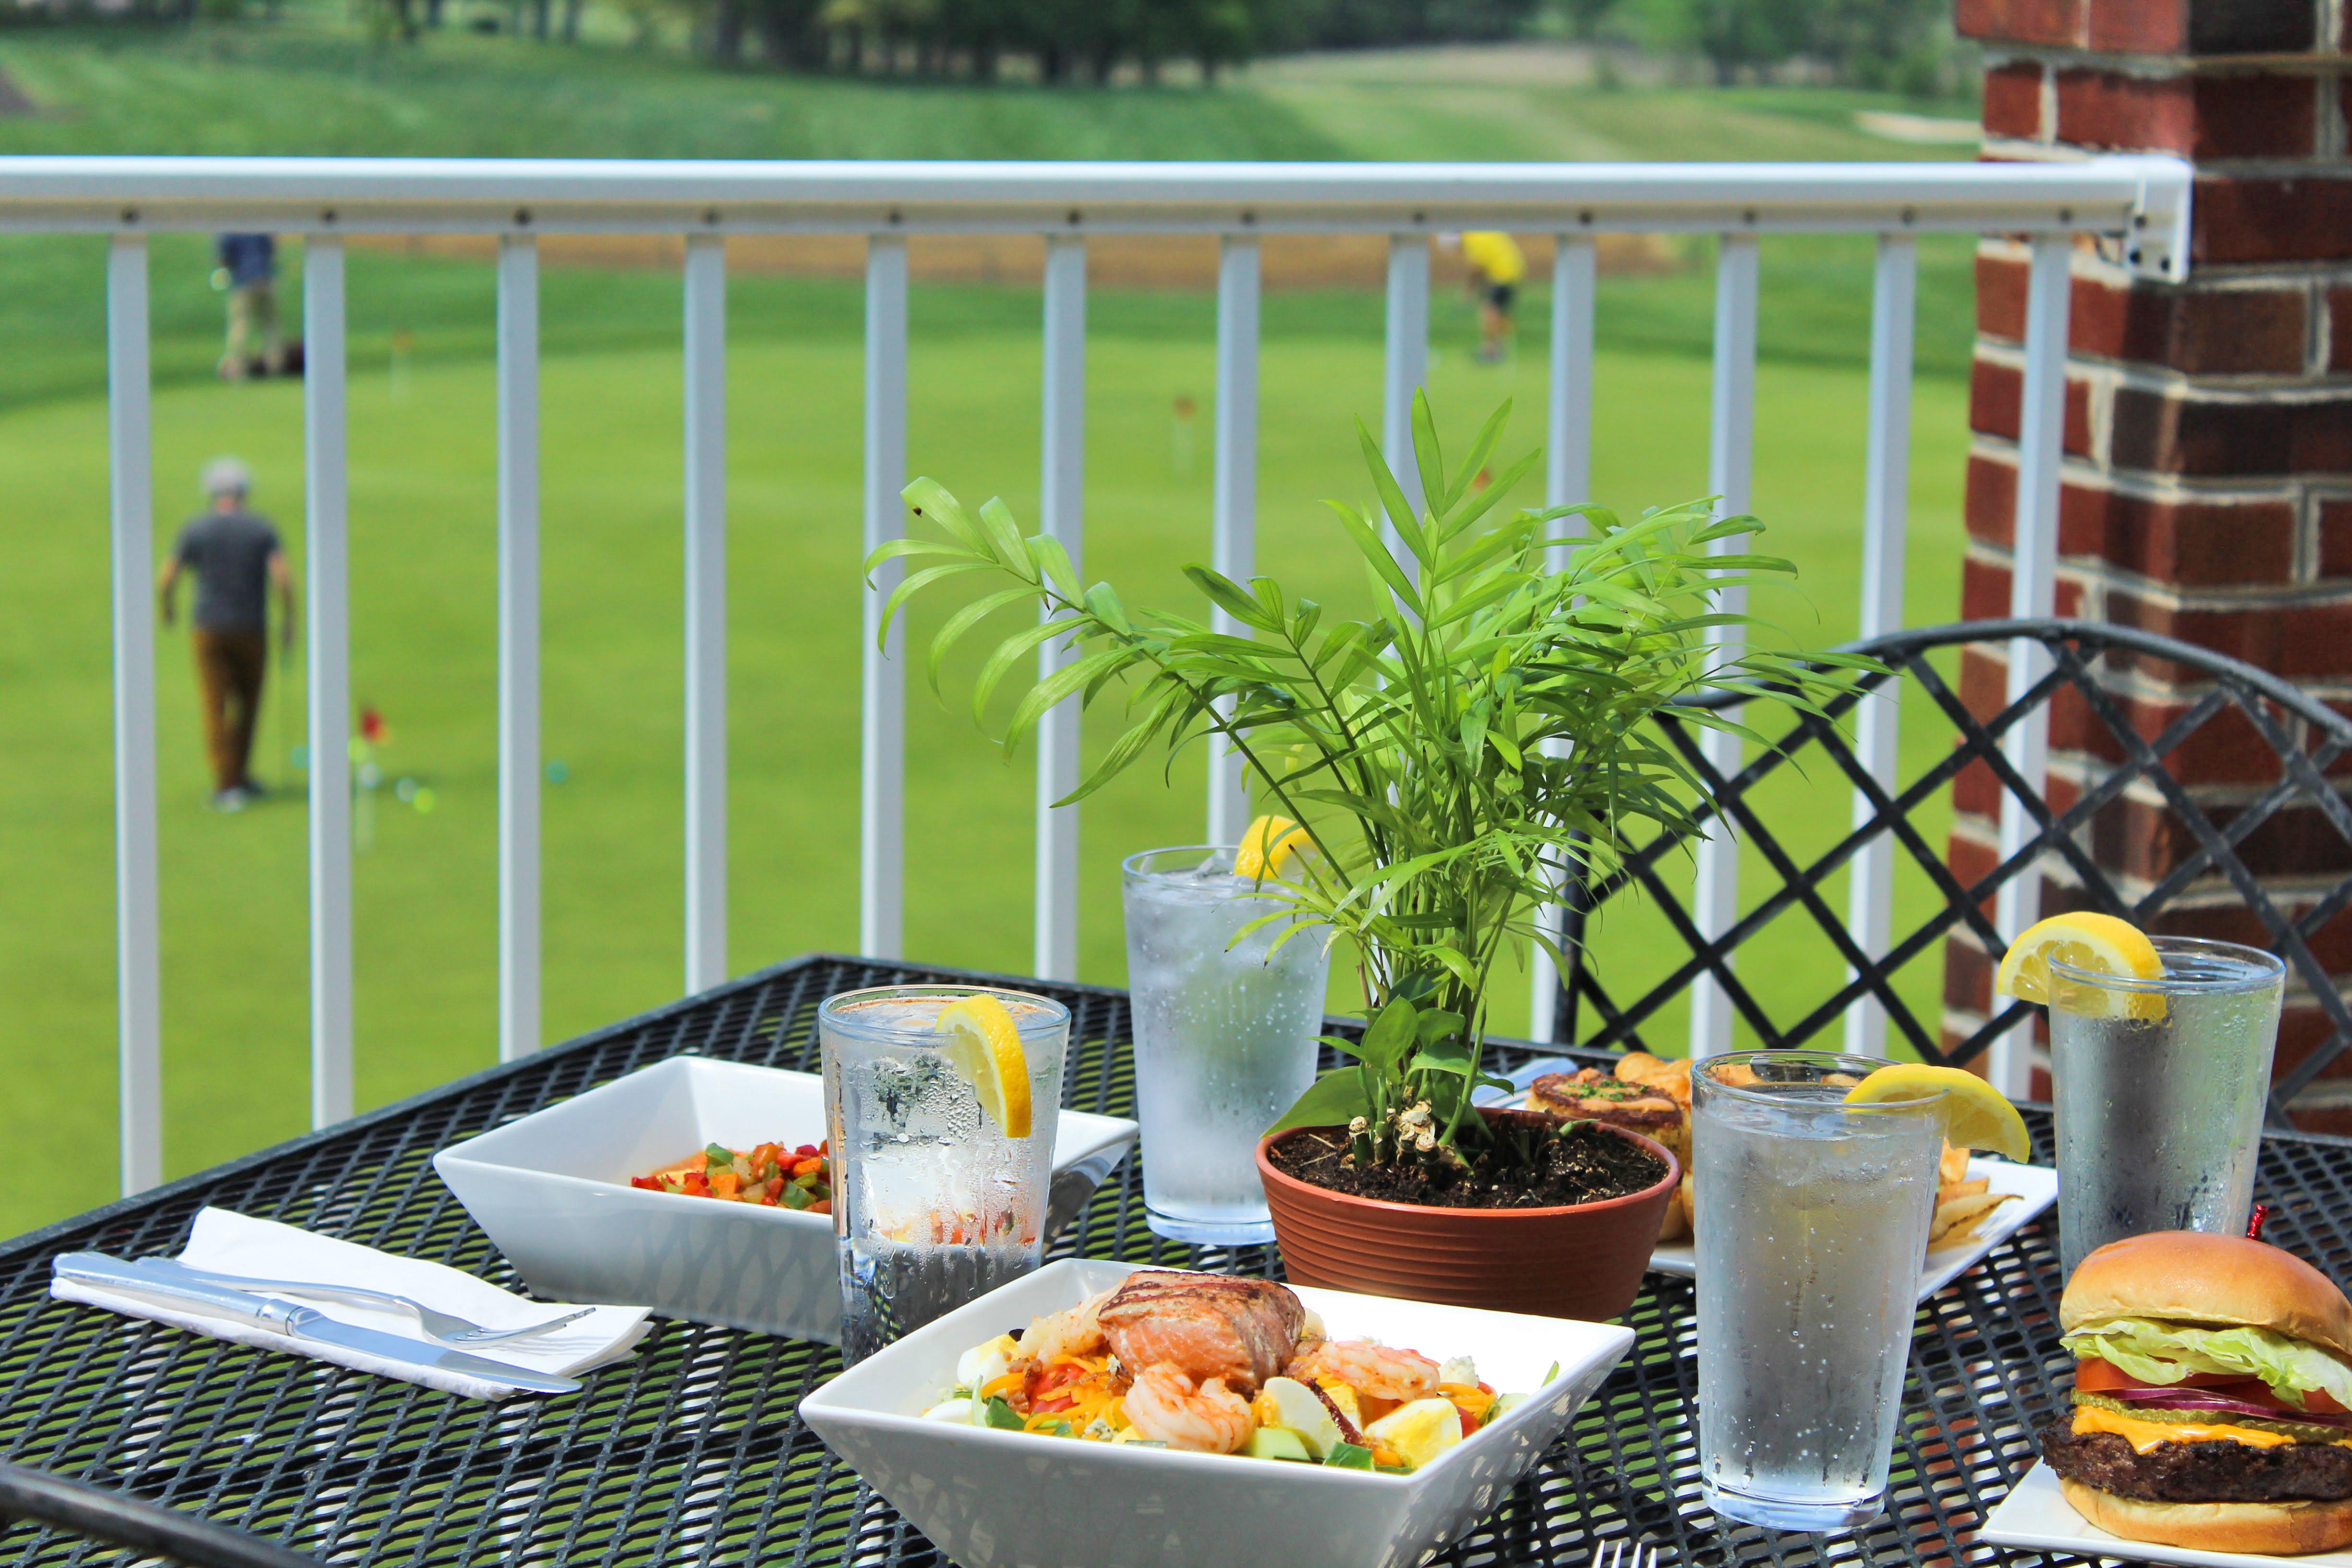 Food served on the balcony overlooking the Mulligan's Golf Course